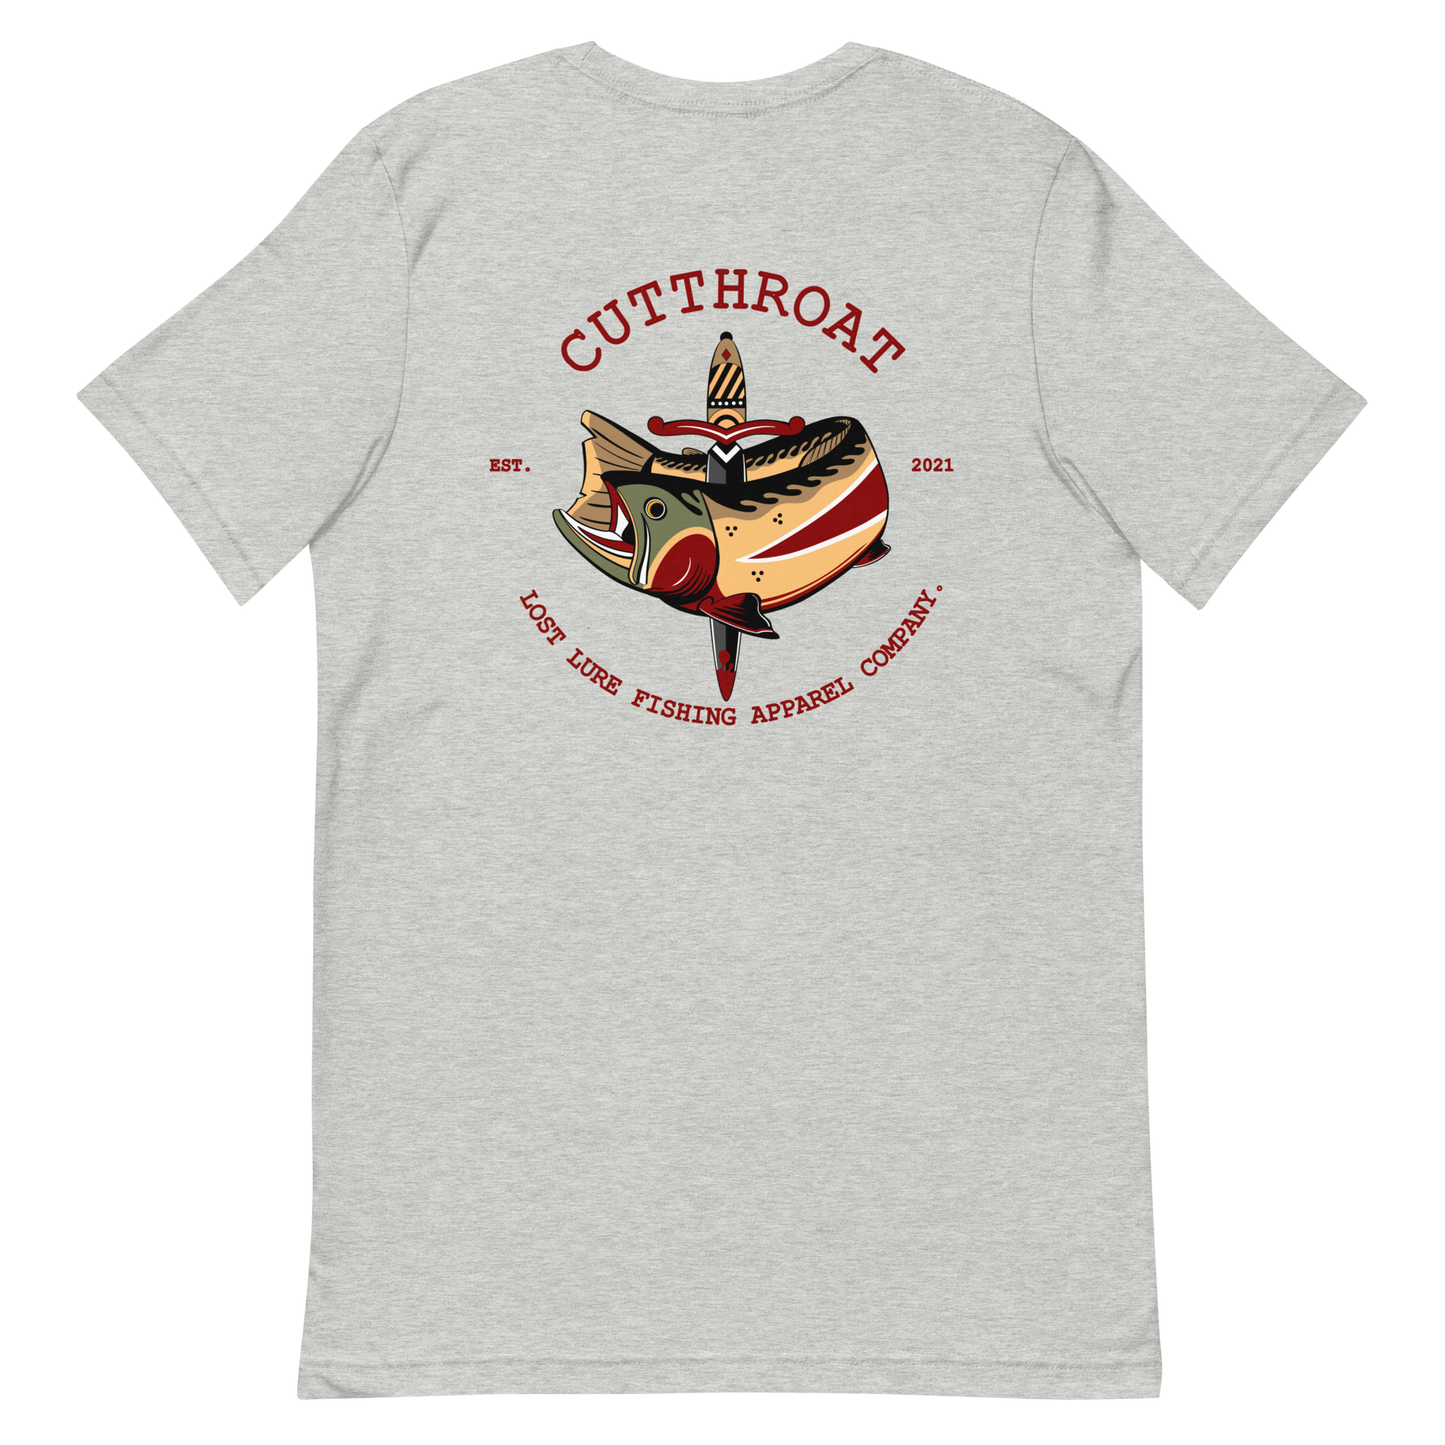 Cutthroat Trout fishing shirt. It’s an American traditional style design with a cutthroat trout and a dagger. The shirt reads Cutthroat trout, est. 2021, lost lure fishing apparel company. The front of the shirt has the lost lure logo. Grey fishing shirt, Back side